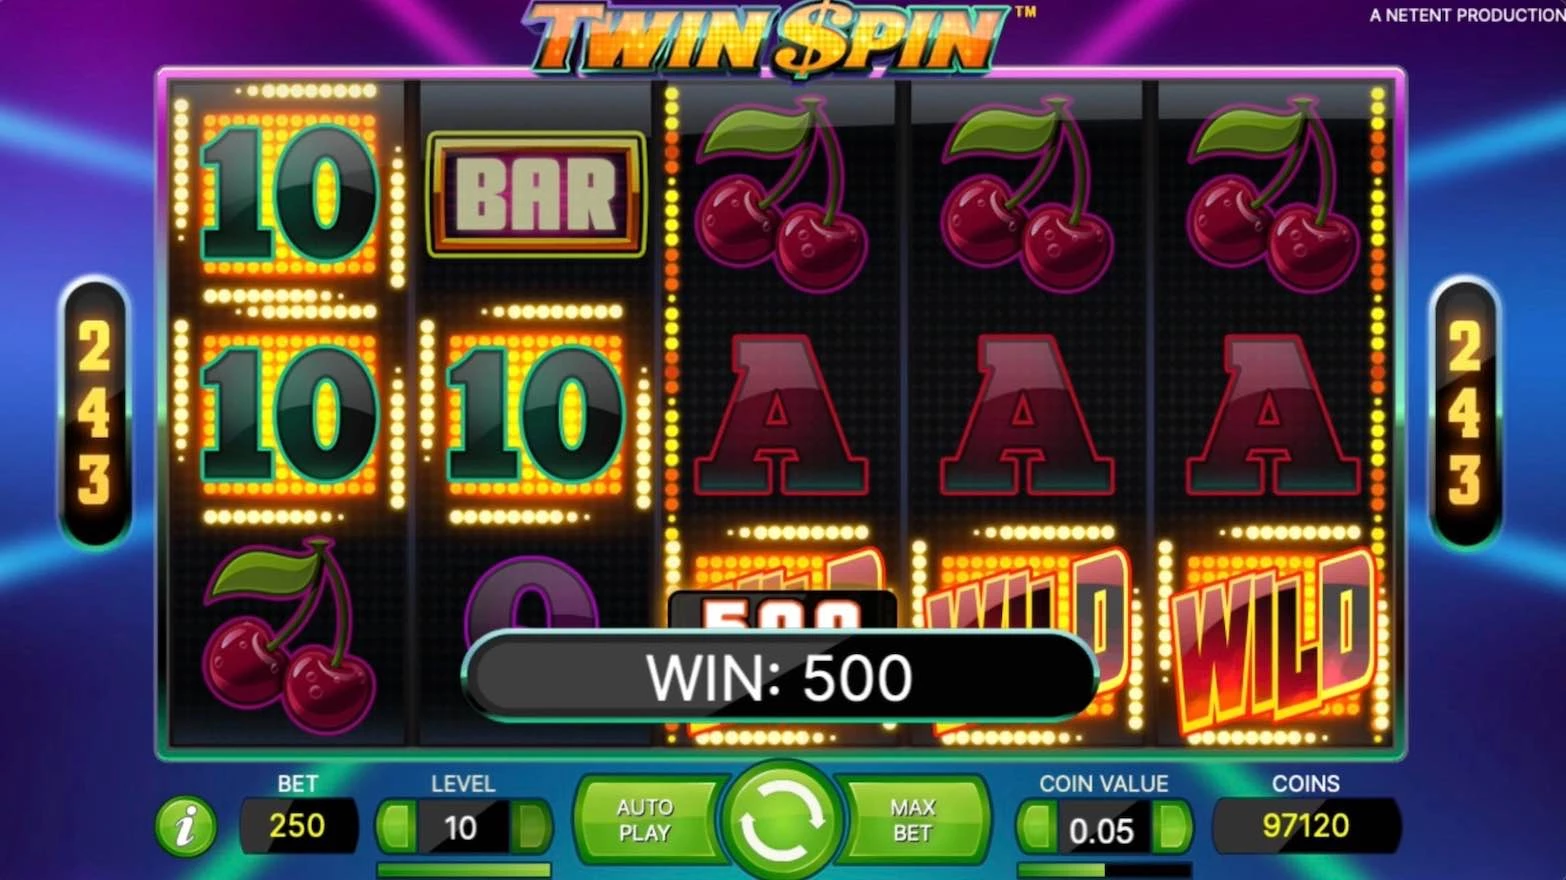 Twin Spin Slot by NetEnt - Ten with Wild Won $500